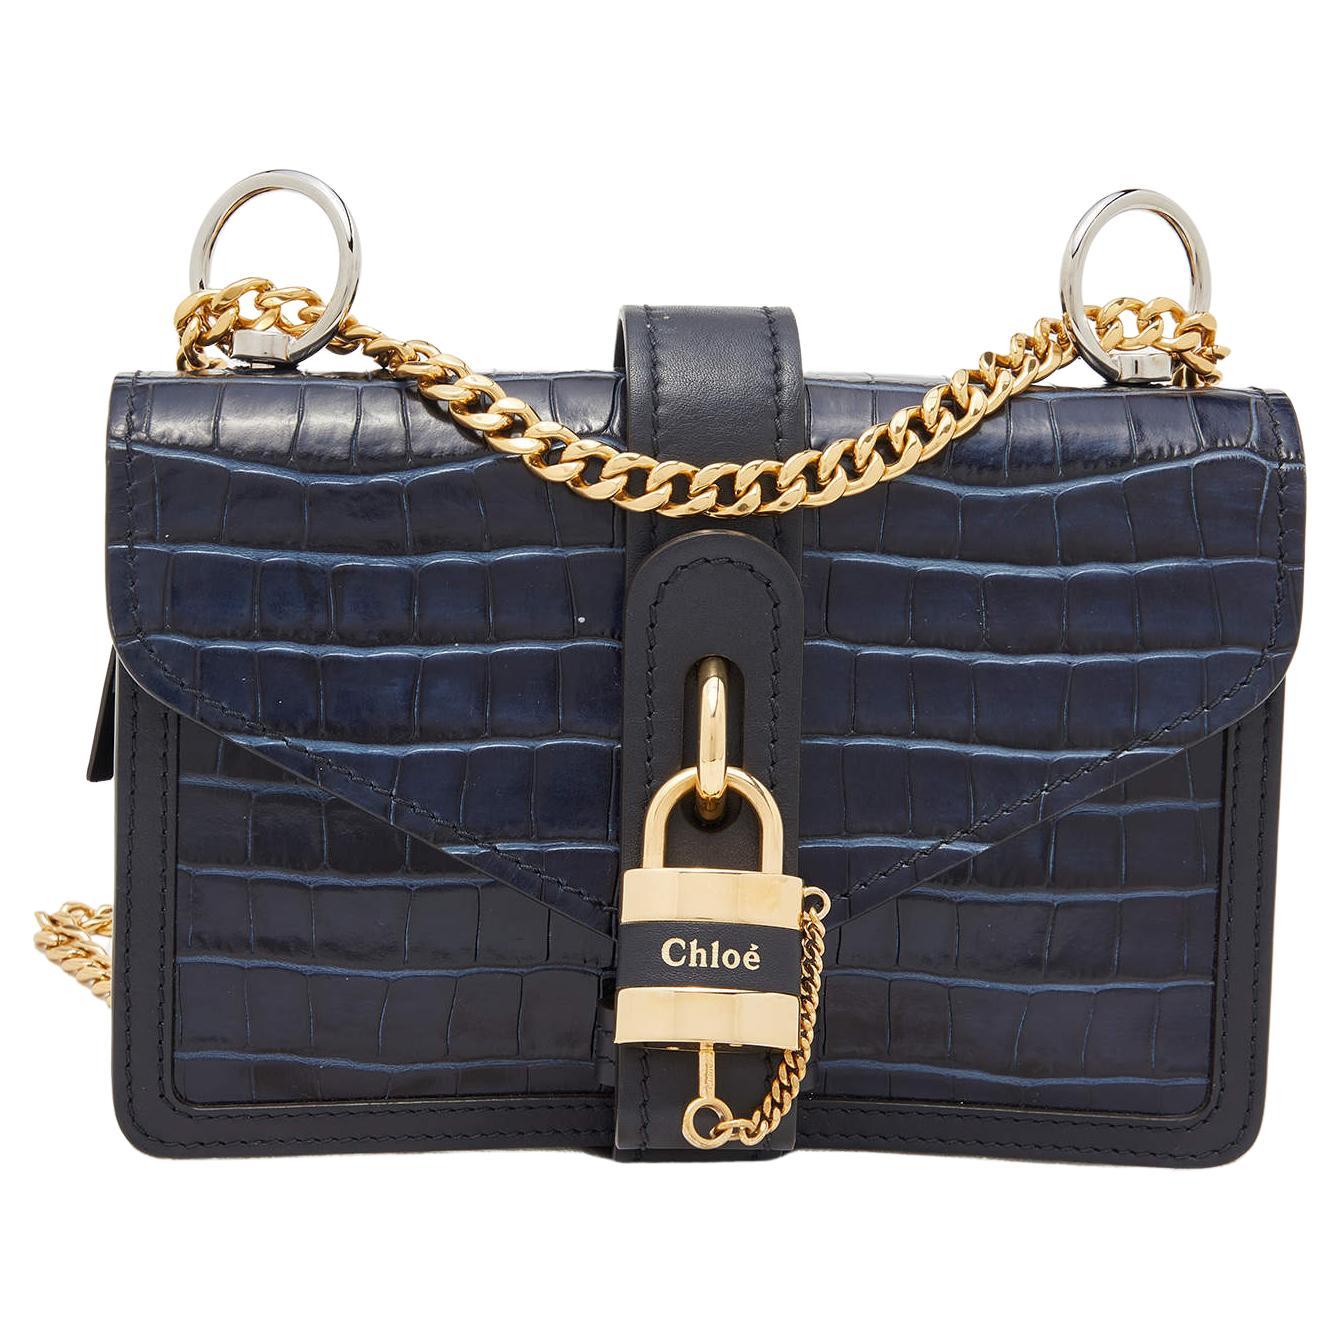 Chloe Navy Blue Croc Embossed Leather Mini Aby Chain Shoulder Bag